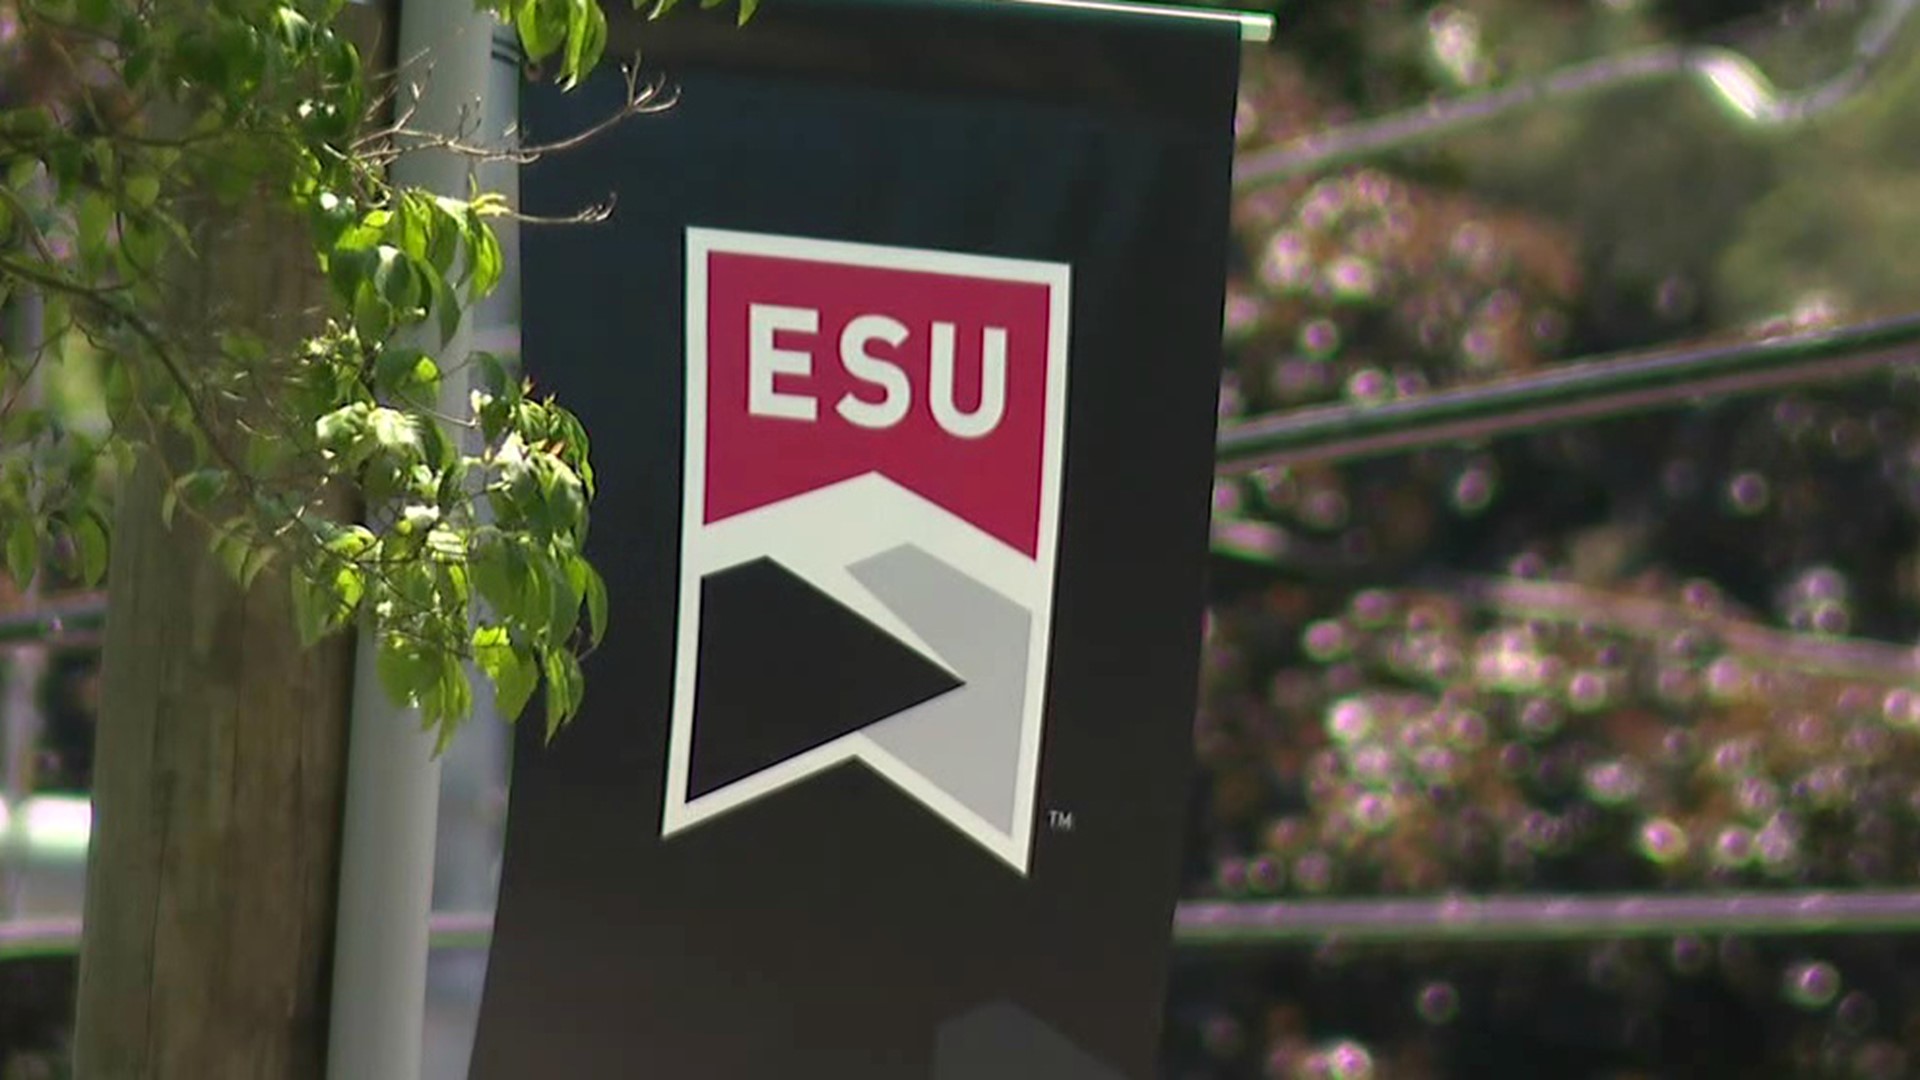 Staff and students we spoke to at ESU say that while the decision is difficult, it's necessary.